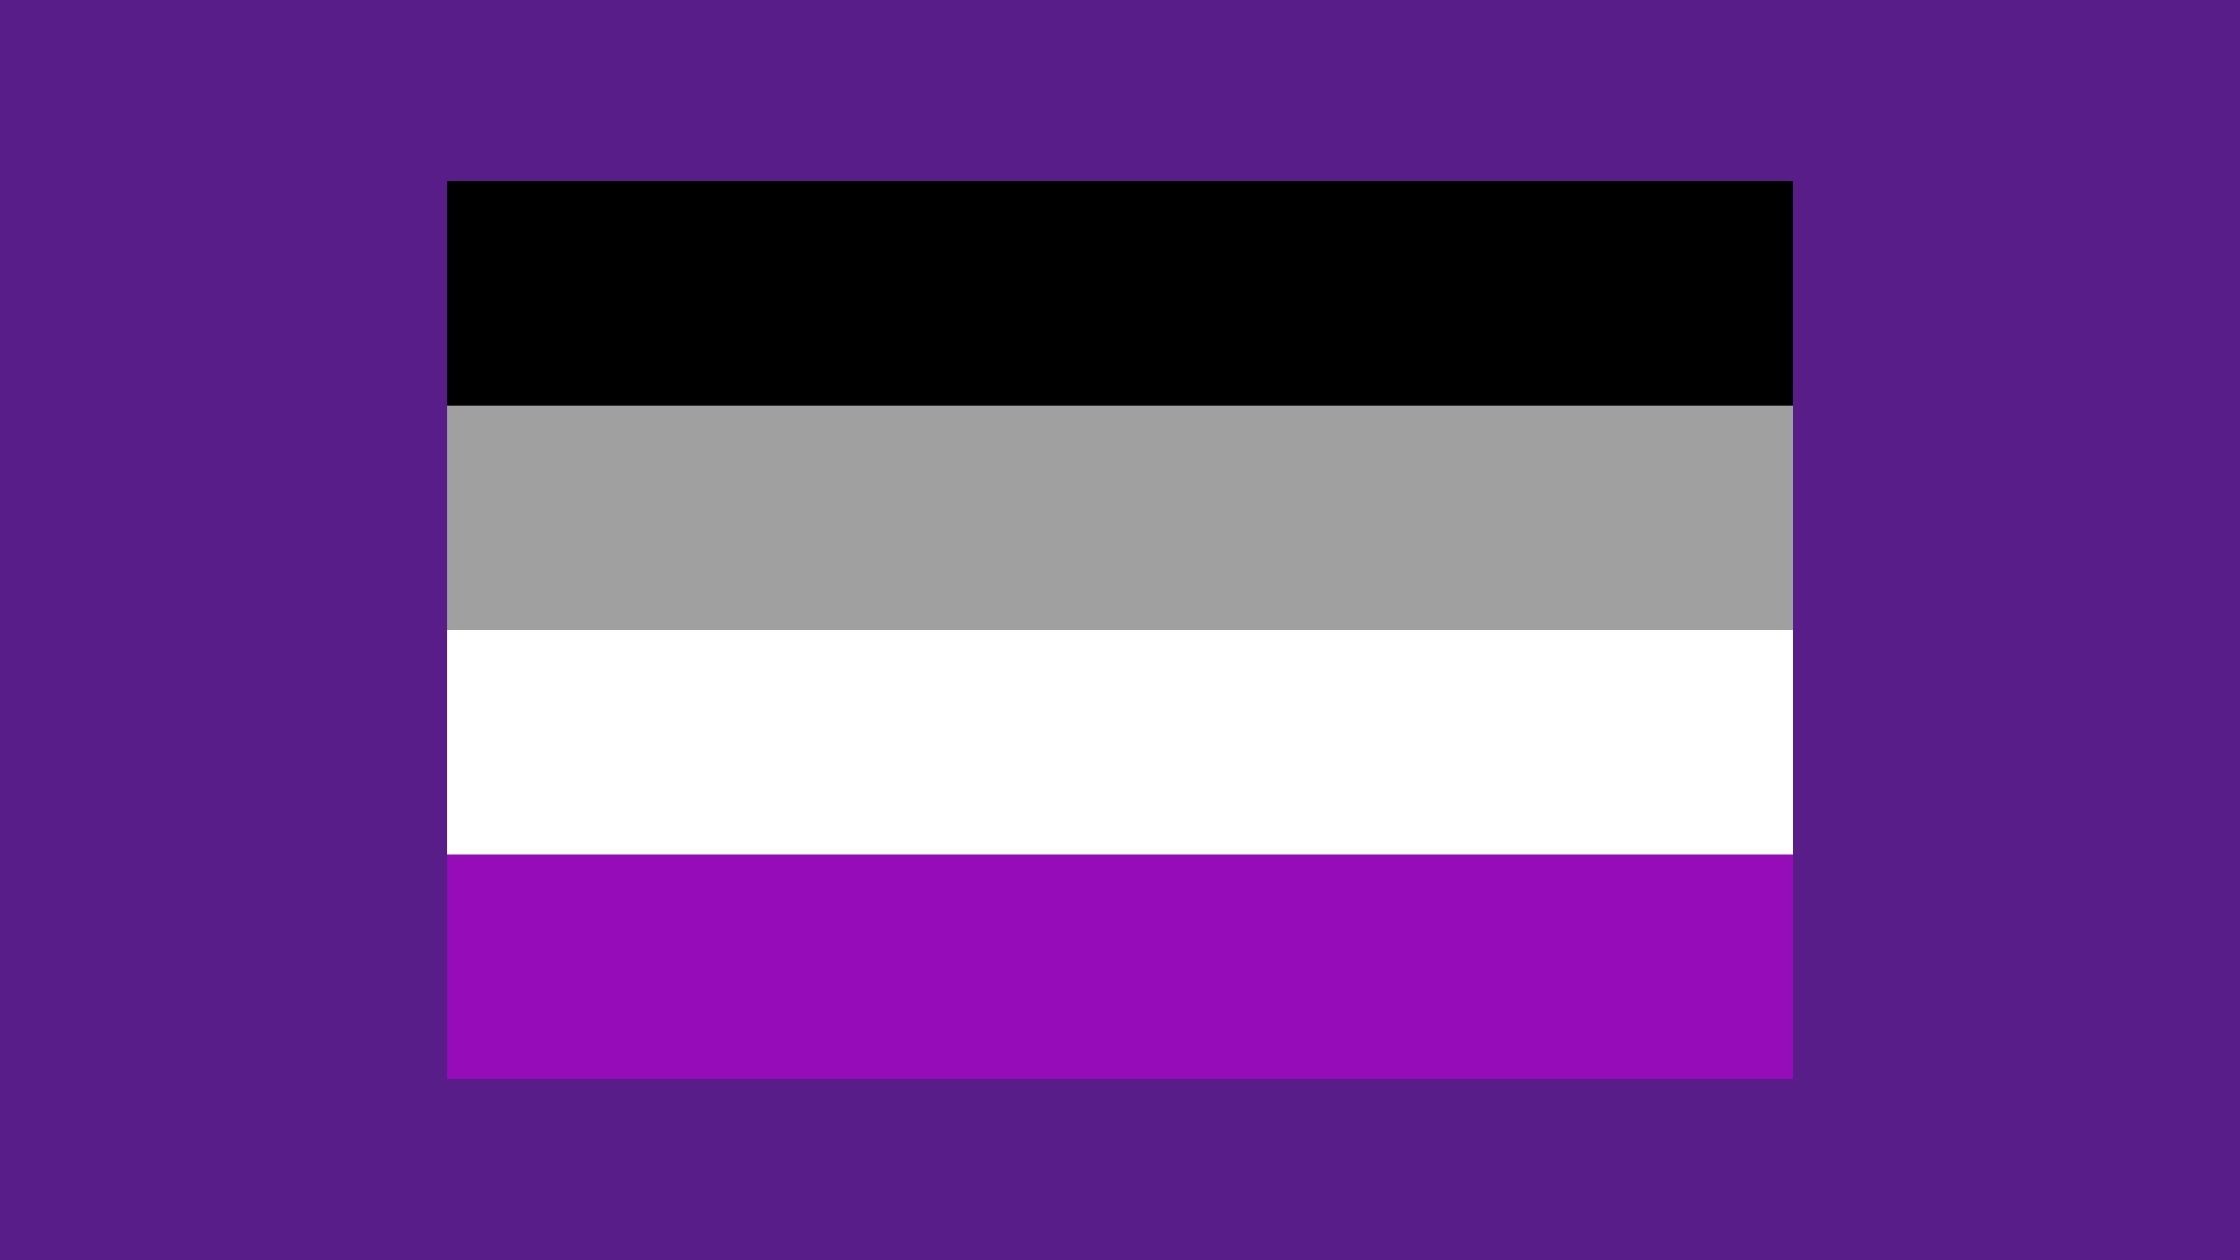 asexuality pride flag consisting of black gray white and purple stipes